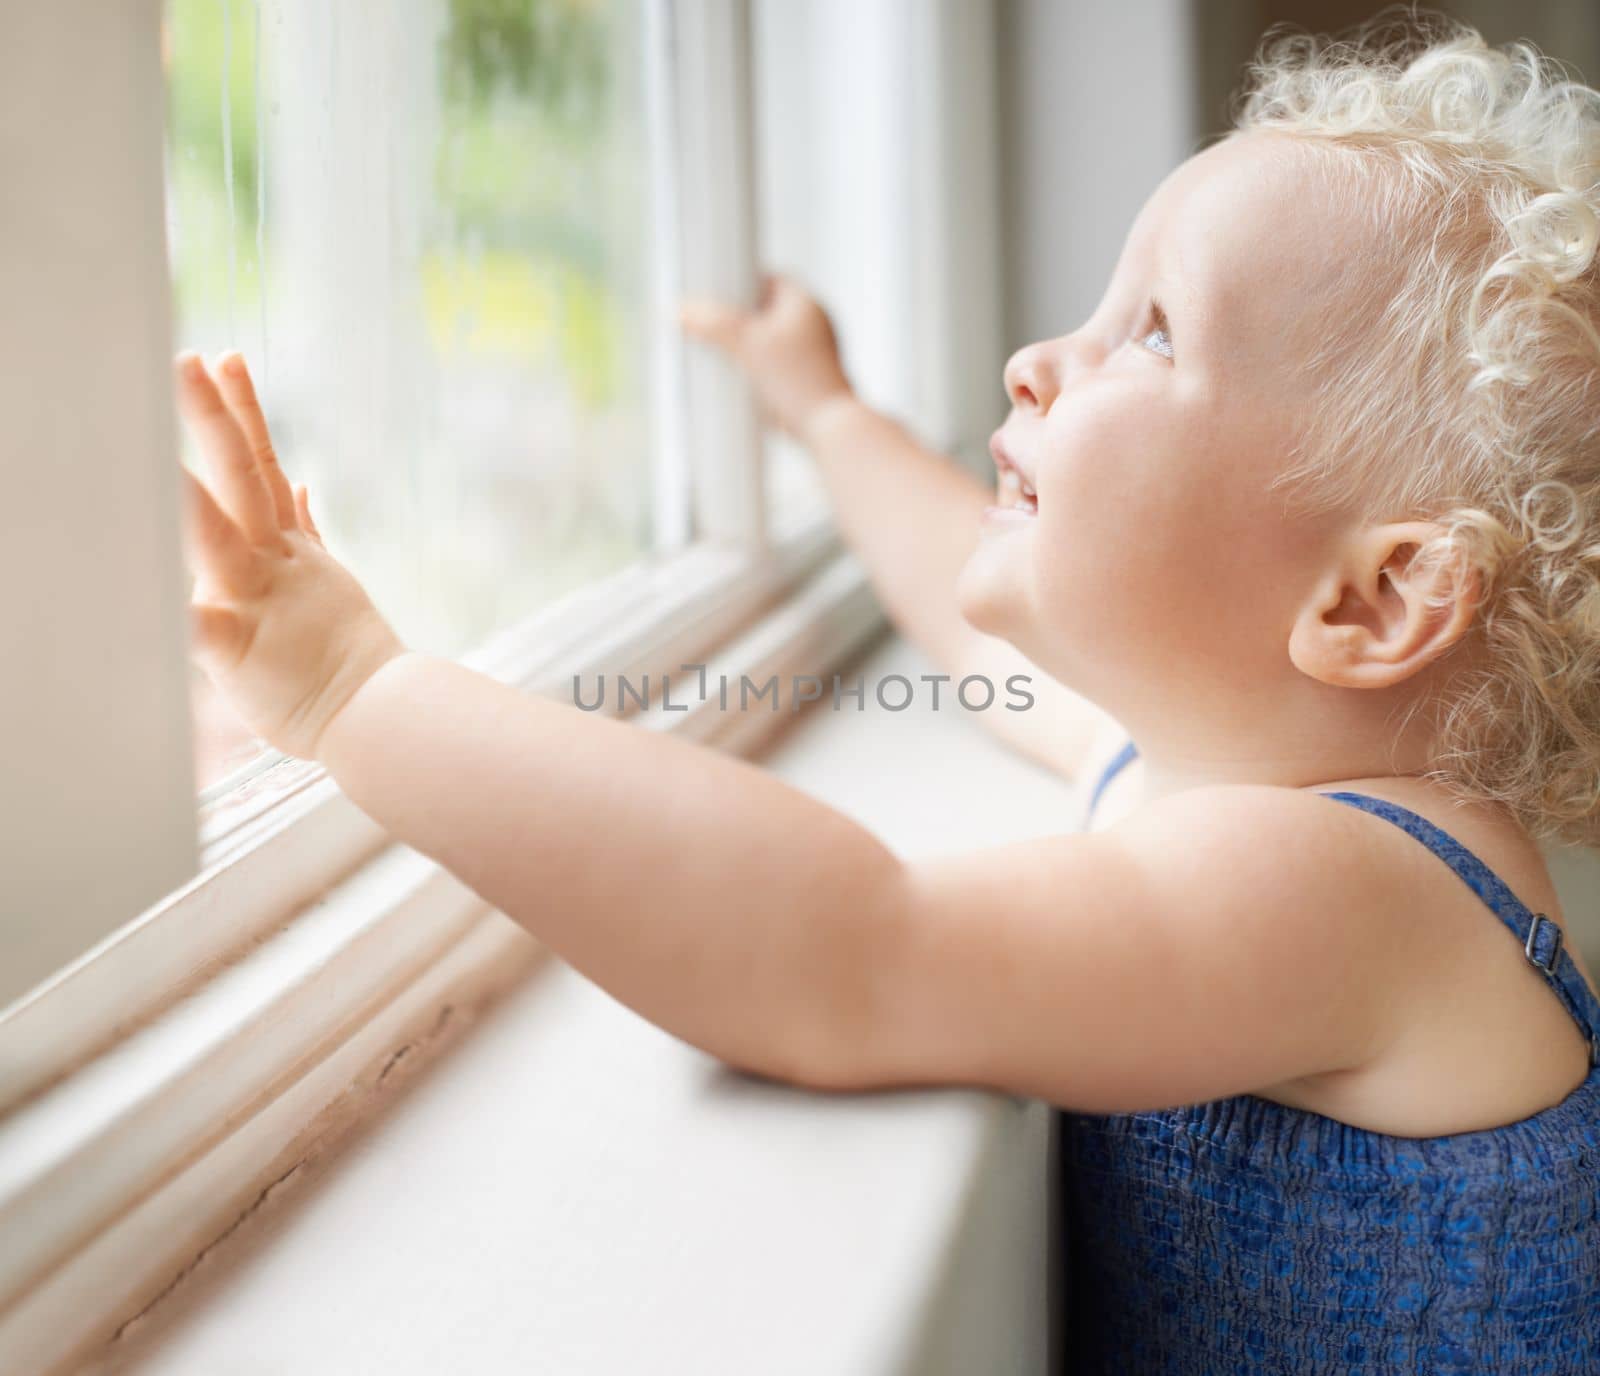 Discovering the world. A cute baby girl peering out of the window. by YuriArcurs